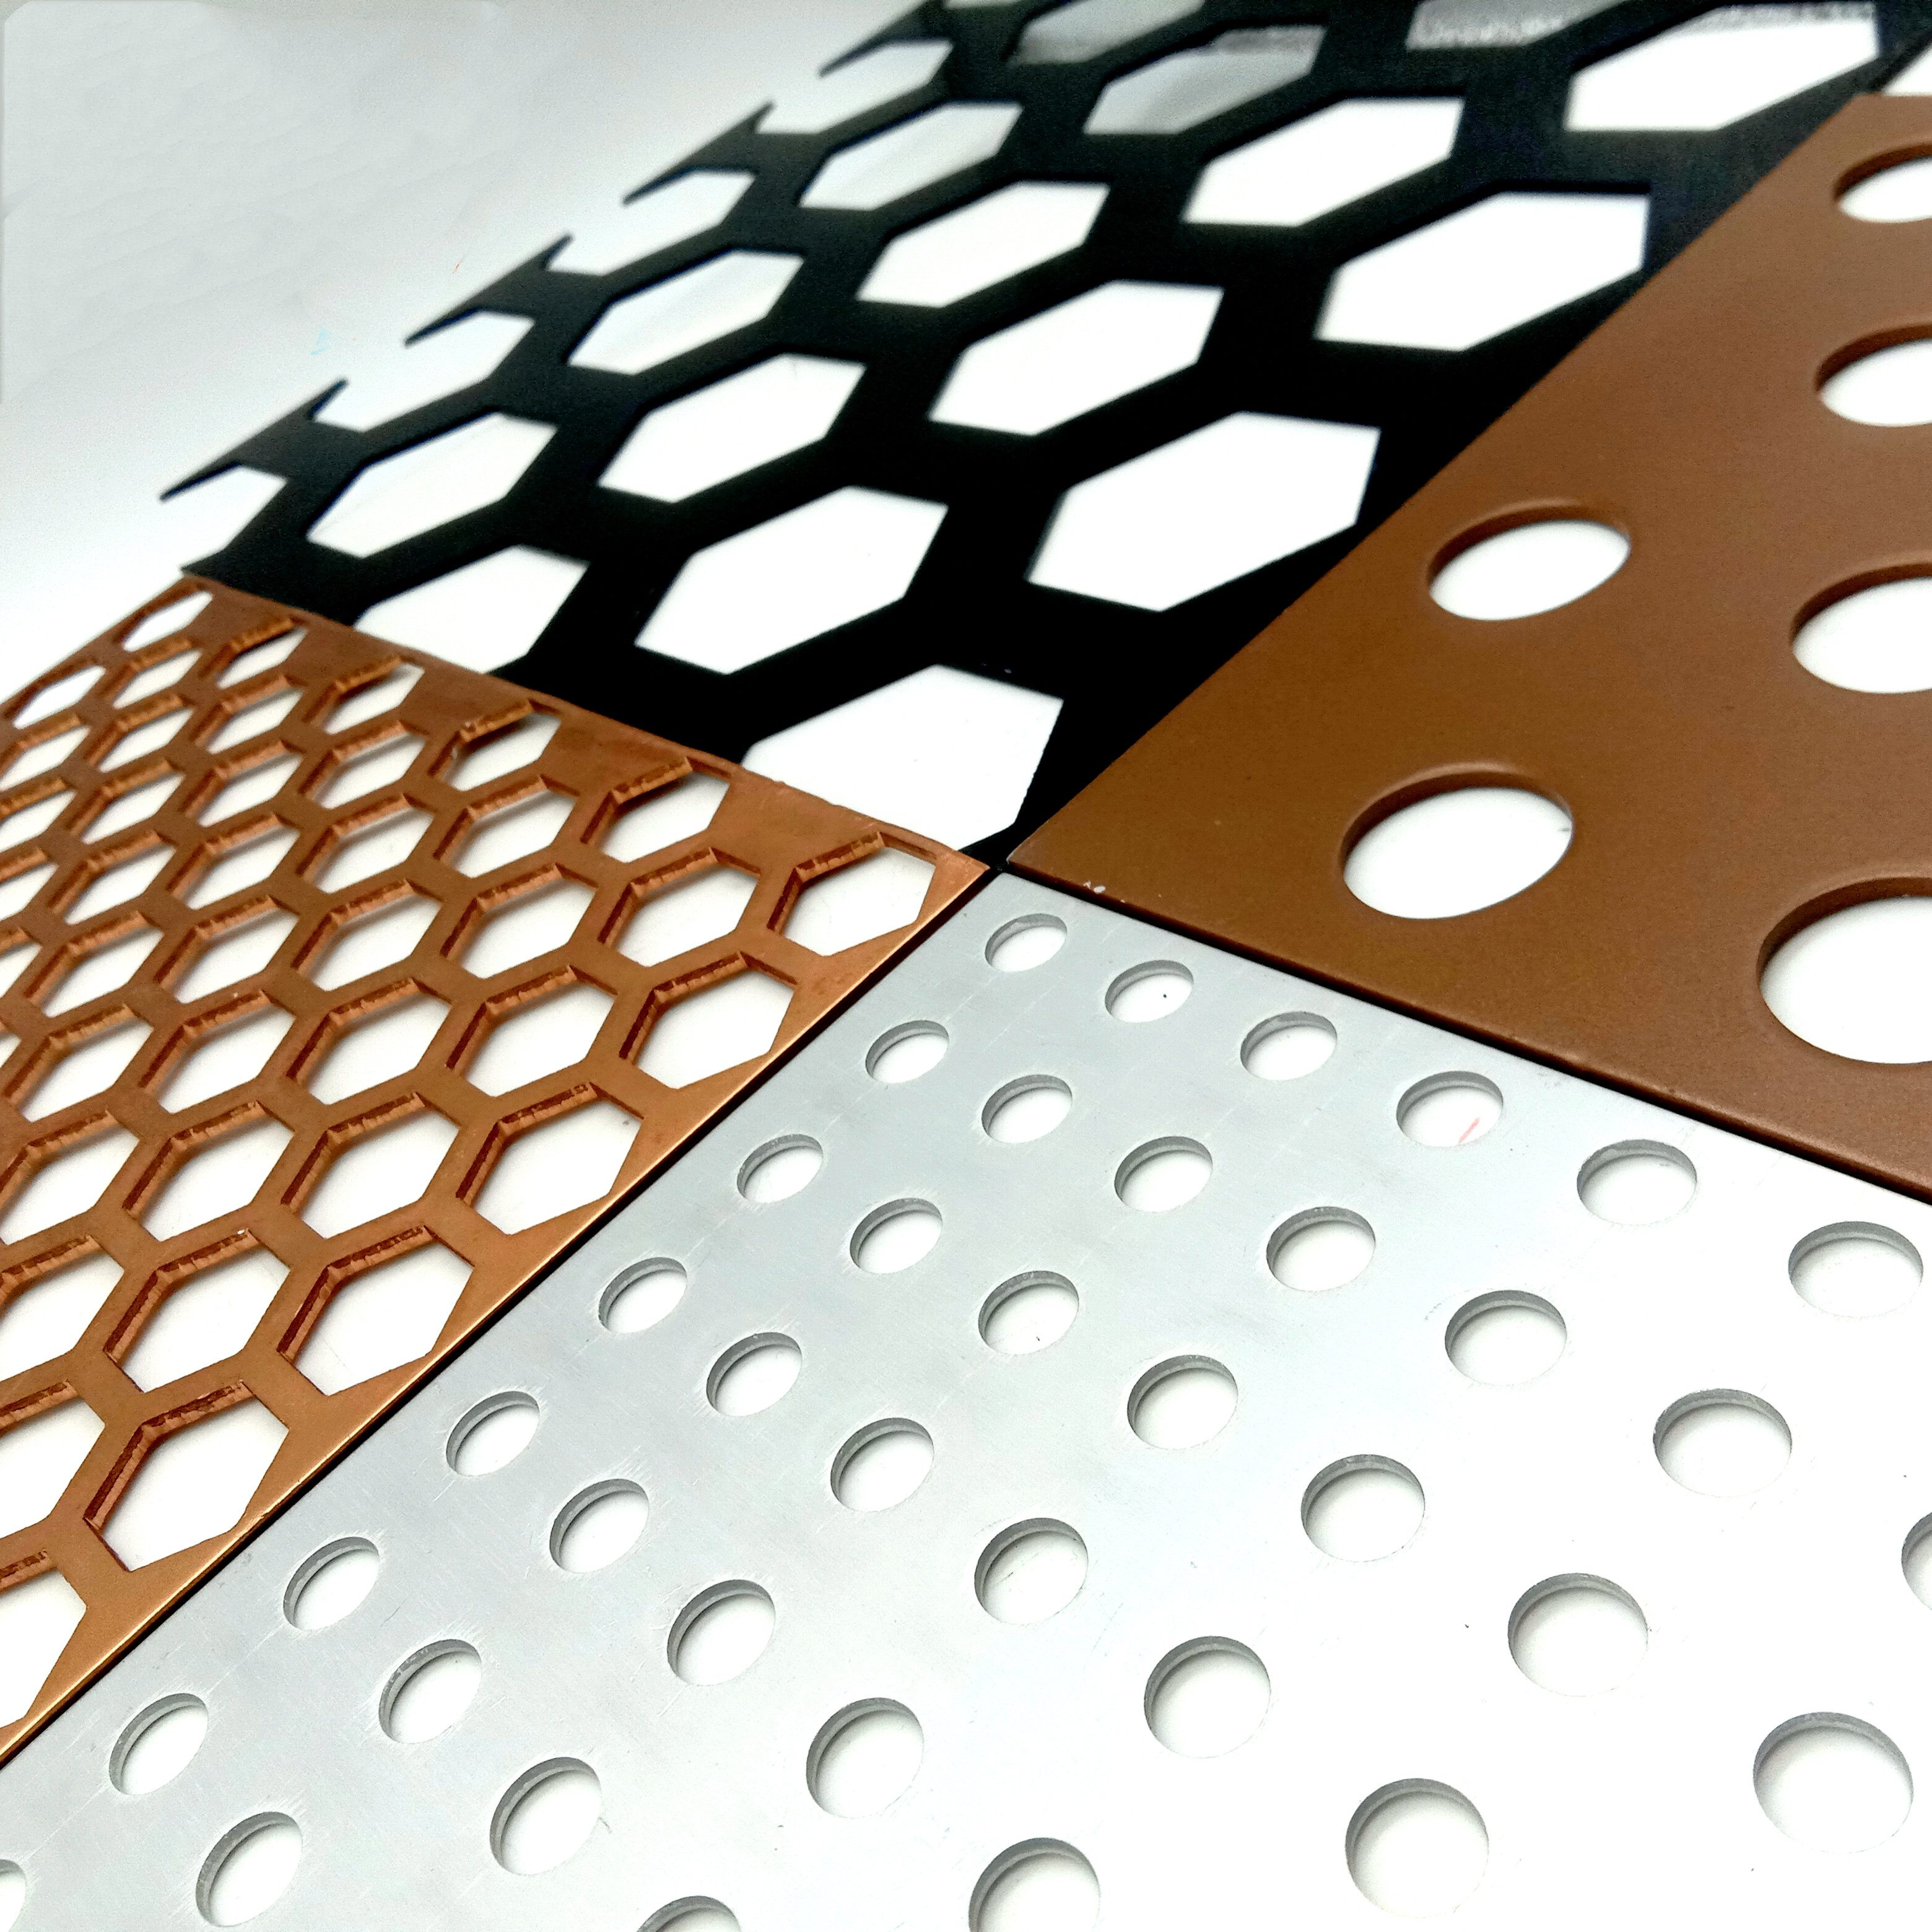 Characteristics of spray-coated perforated mesh